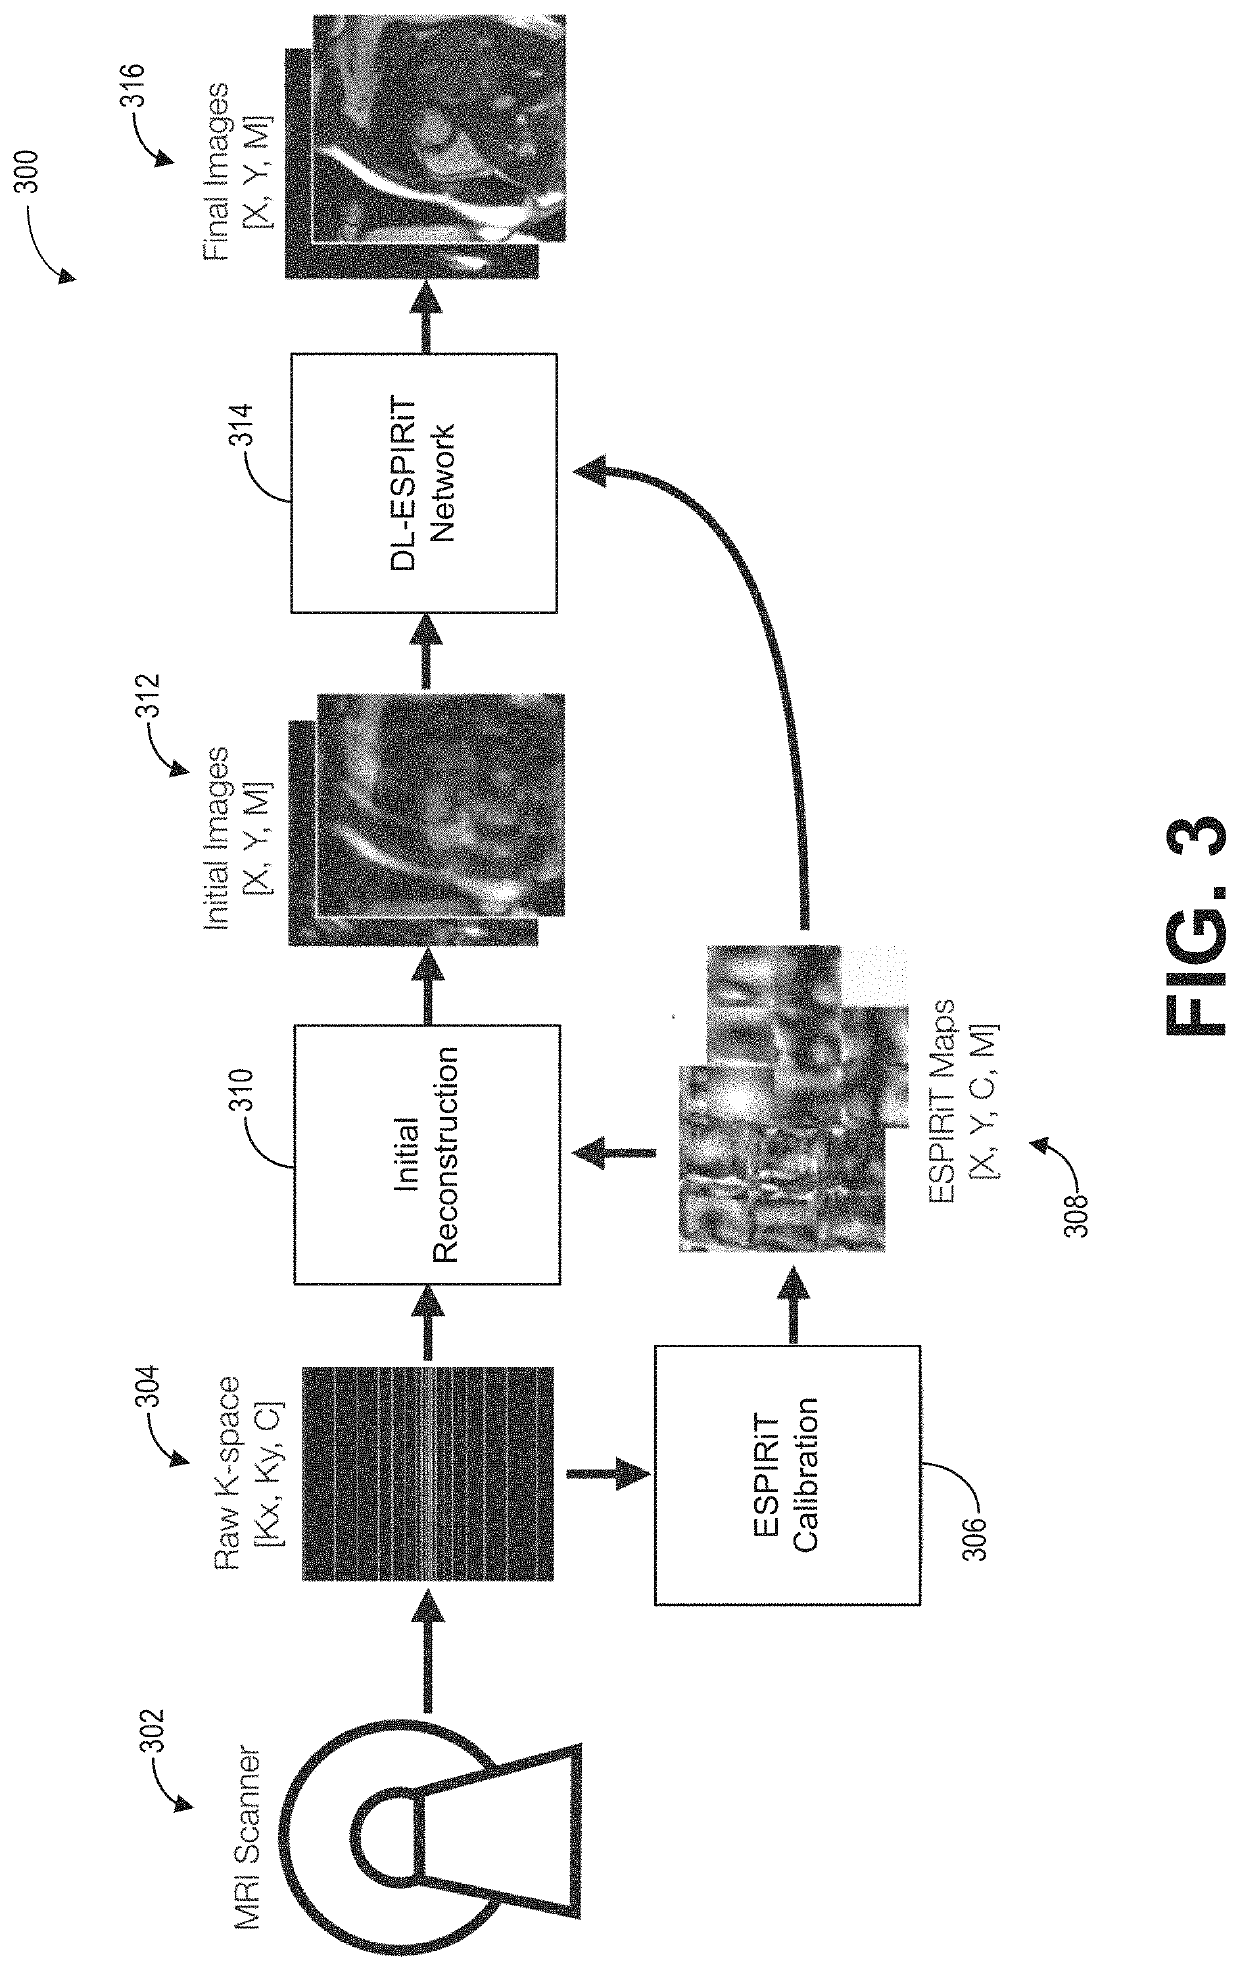 Methods and systems for magnetic resonance image reconstruction using an extended sensitivity model and a deep neural network